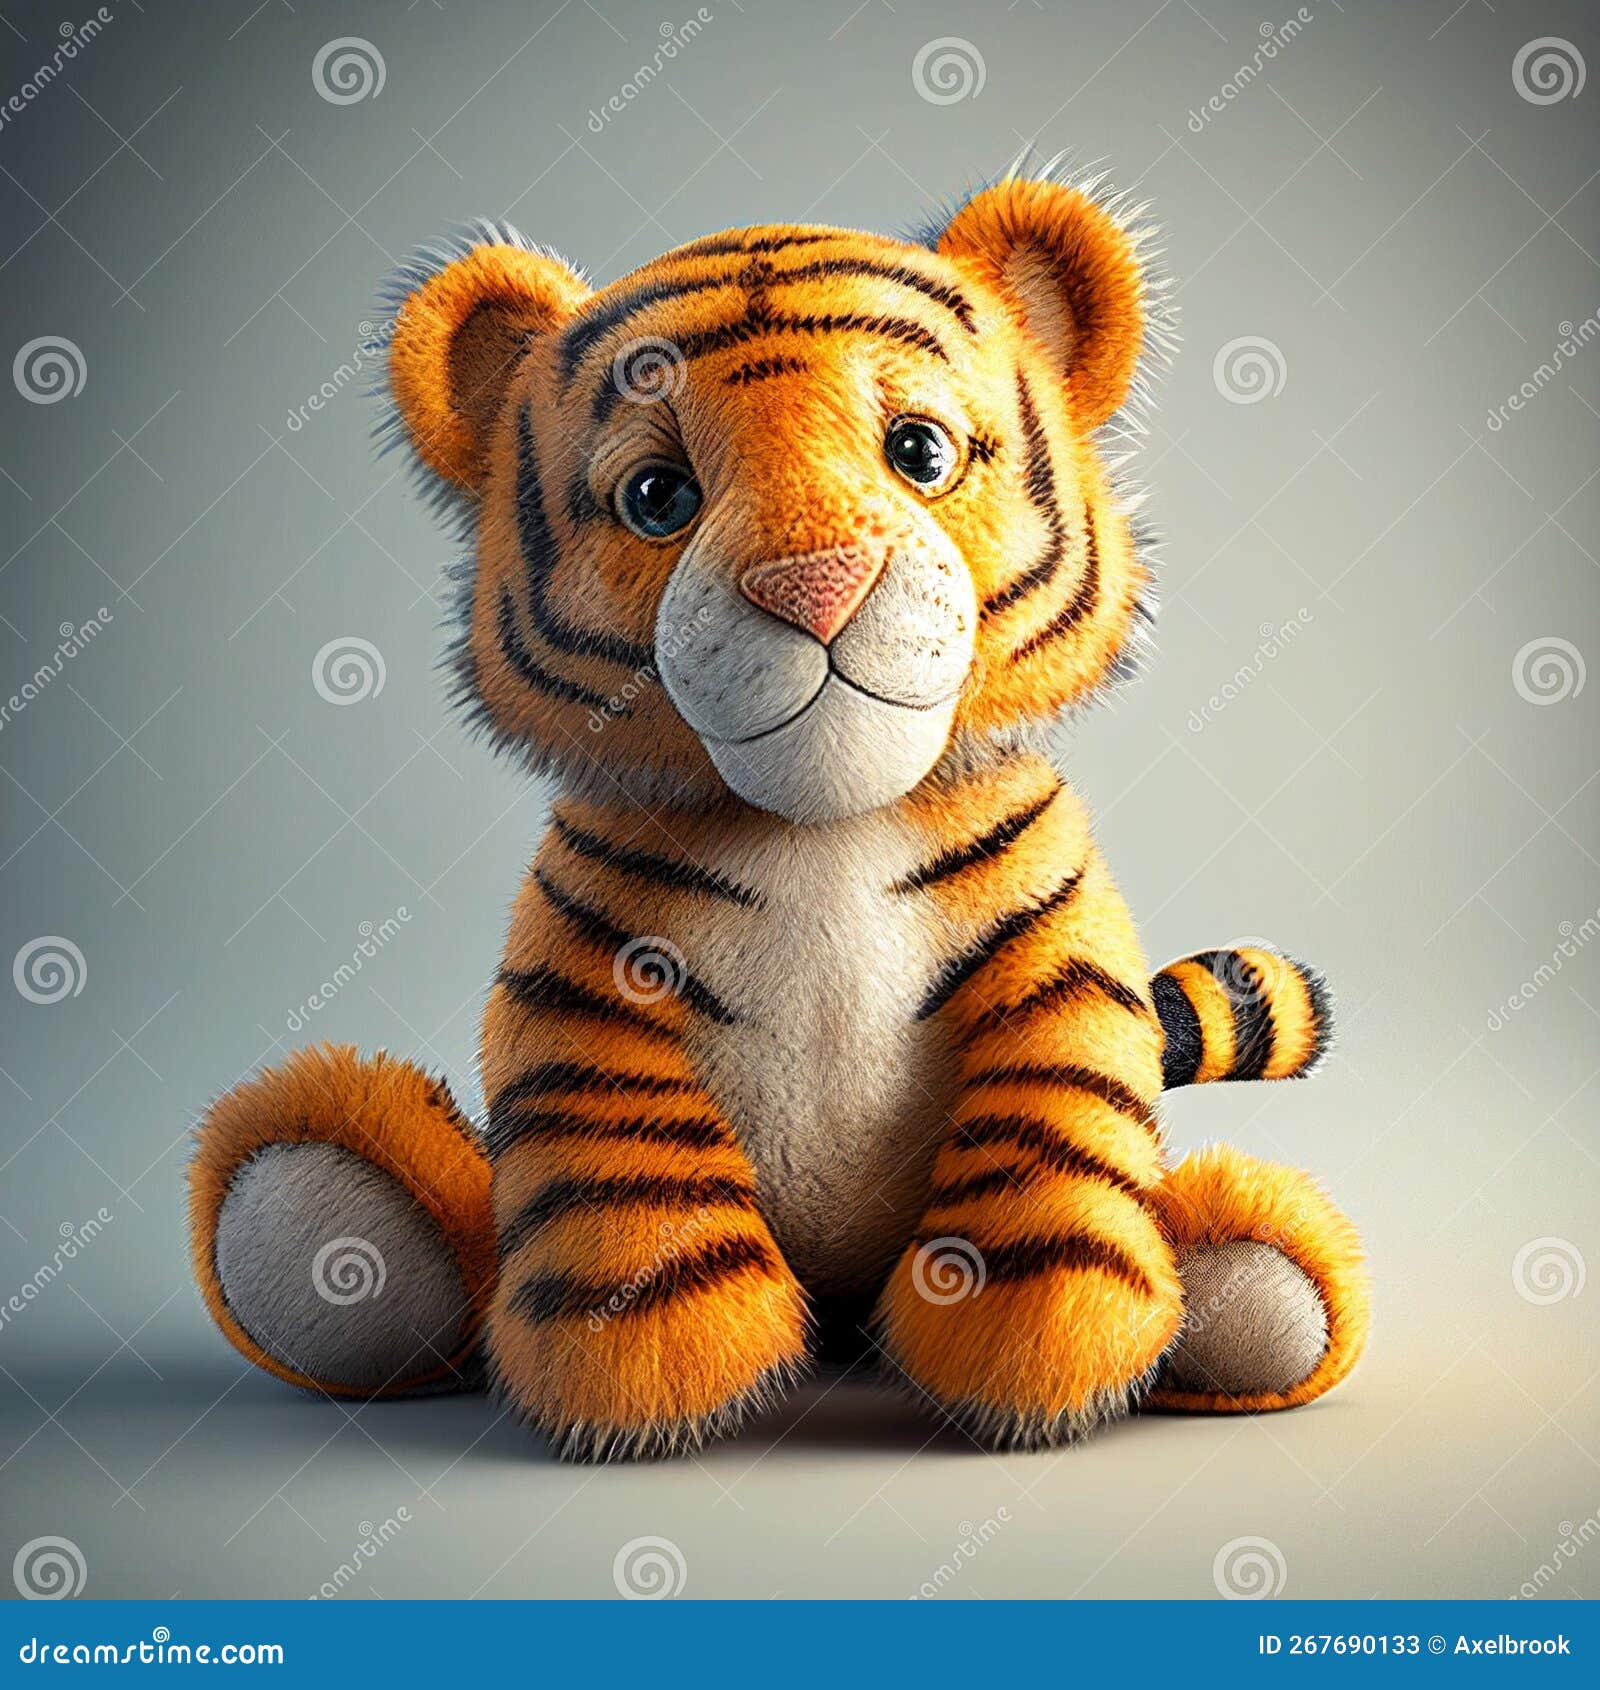 3d Rendered Illustration Of Sitting Tiger Cartoon Character Stock Photo,  Picture and Royalty Free Image. Image 53977474.